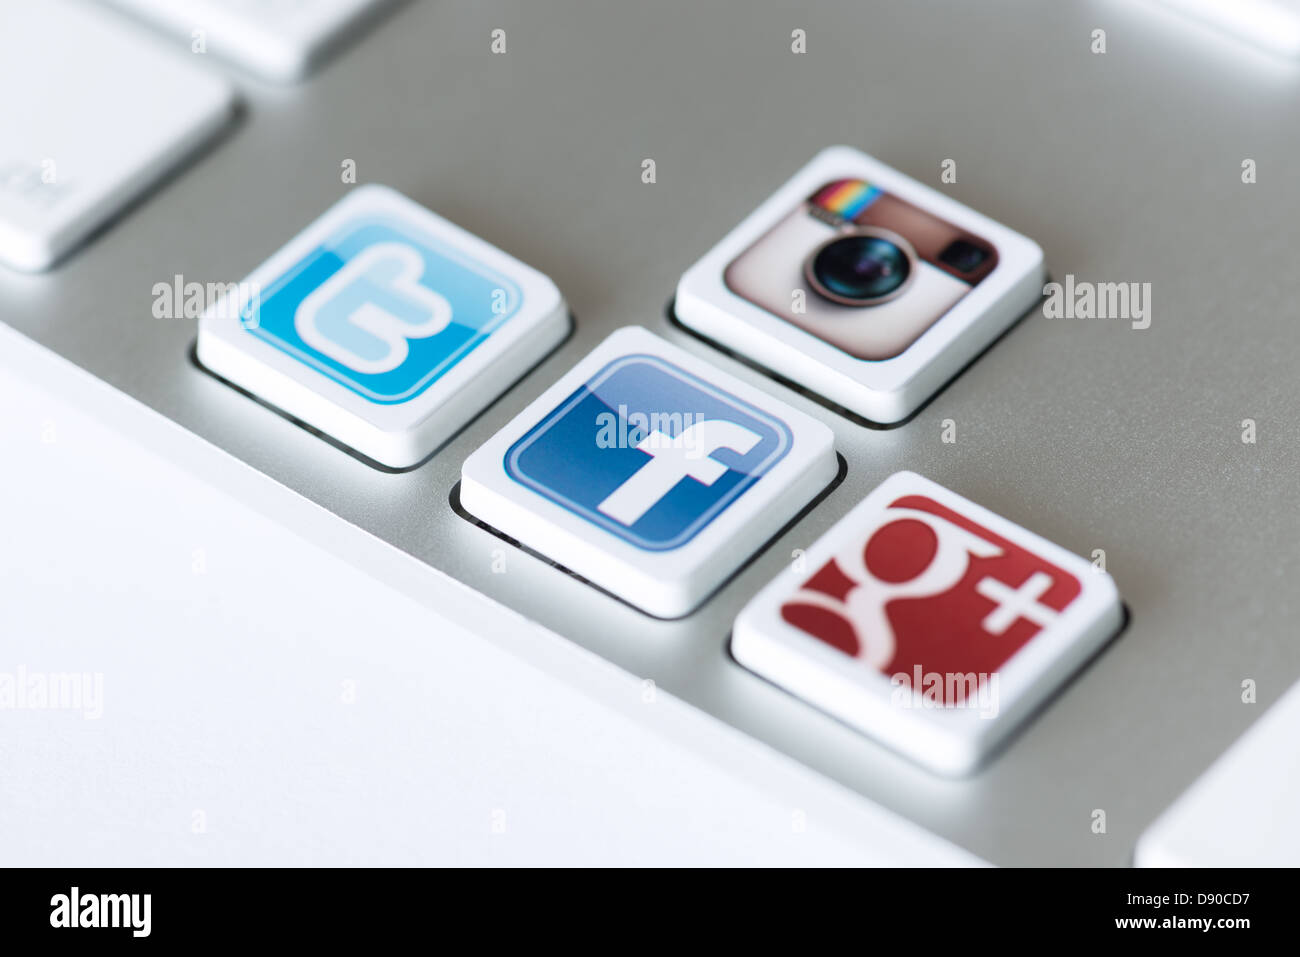 A social media icons of Facebook, Twitter, Google Plus and Instagram placed on computer keyboard keys. Stock Photo